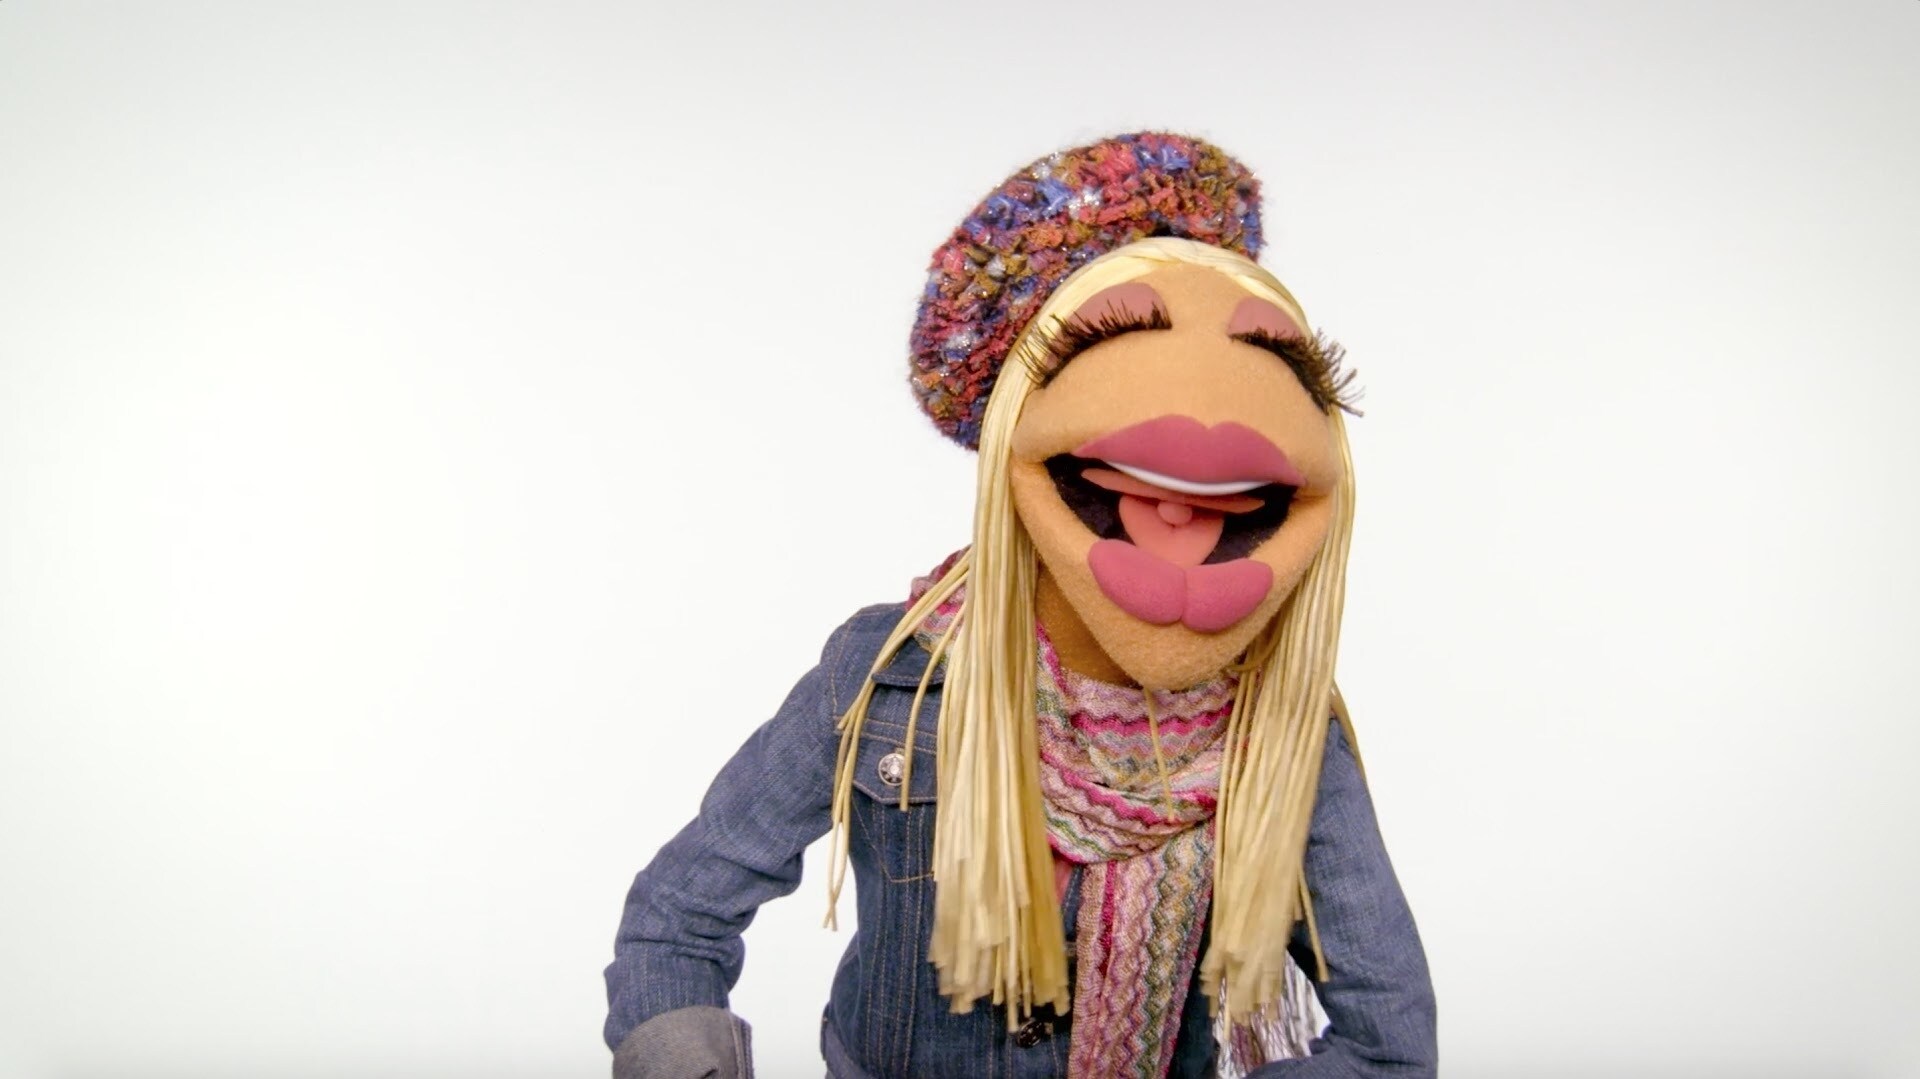 Janice's Groovy Motivation | Muppet Thought of the Week by The Muppets